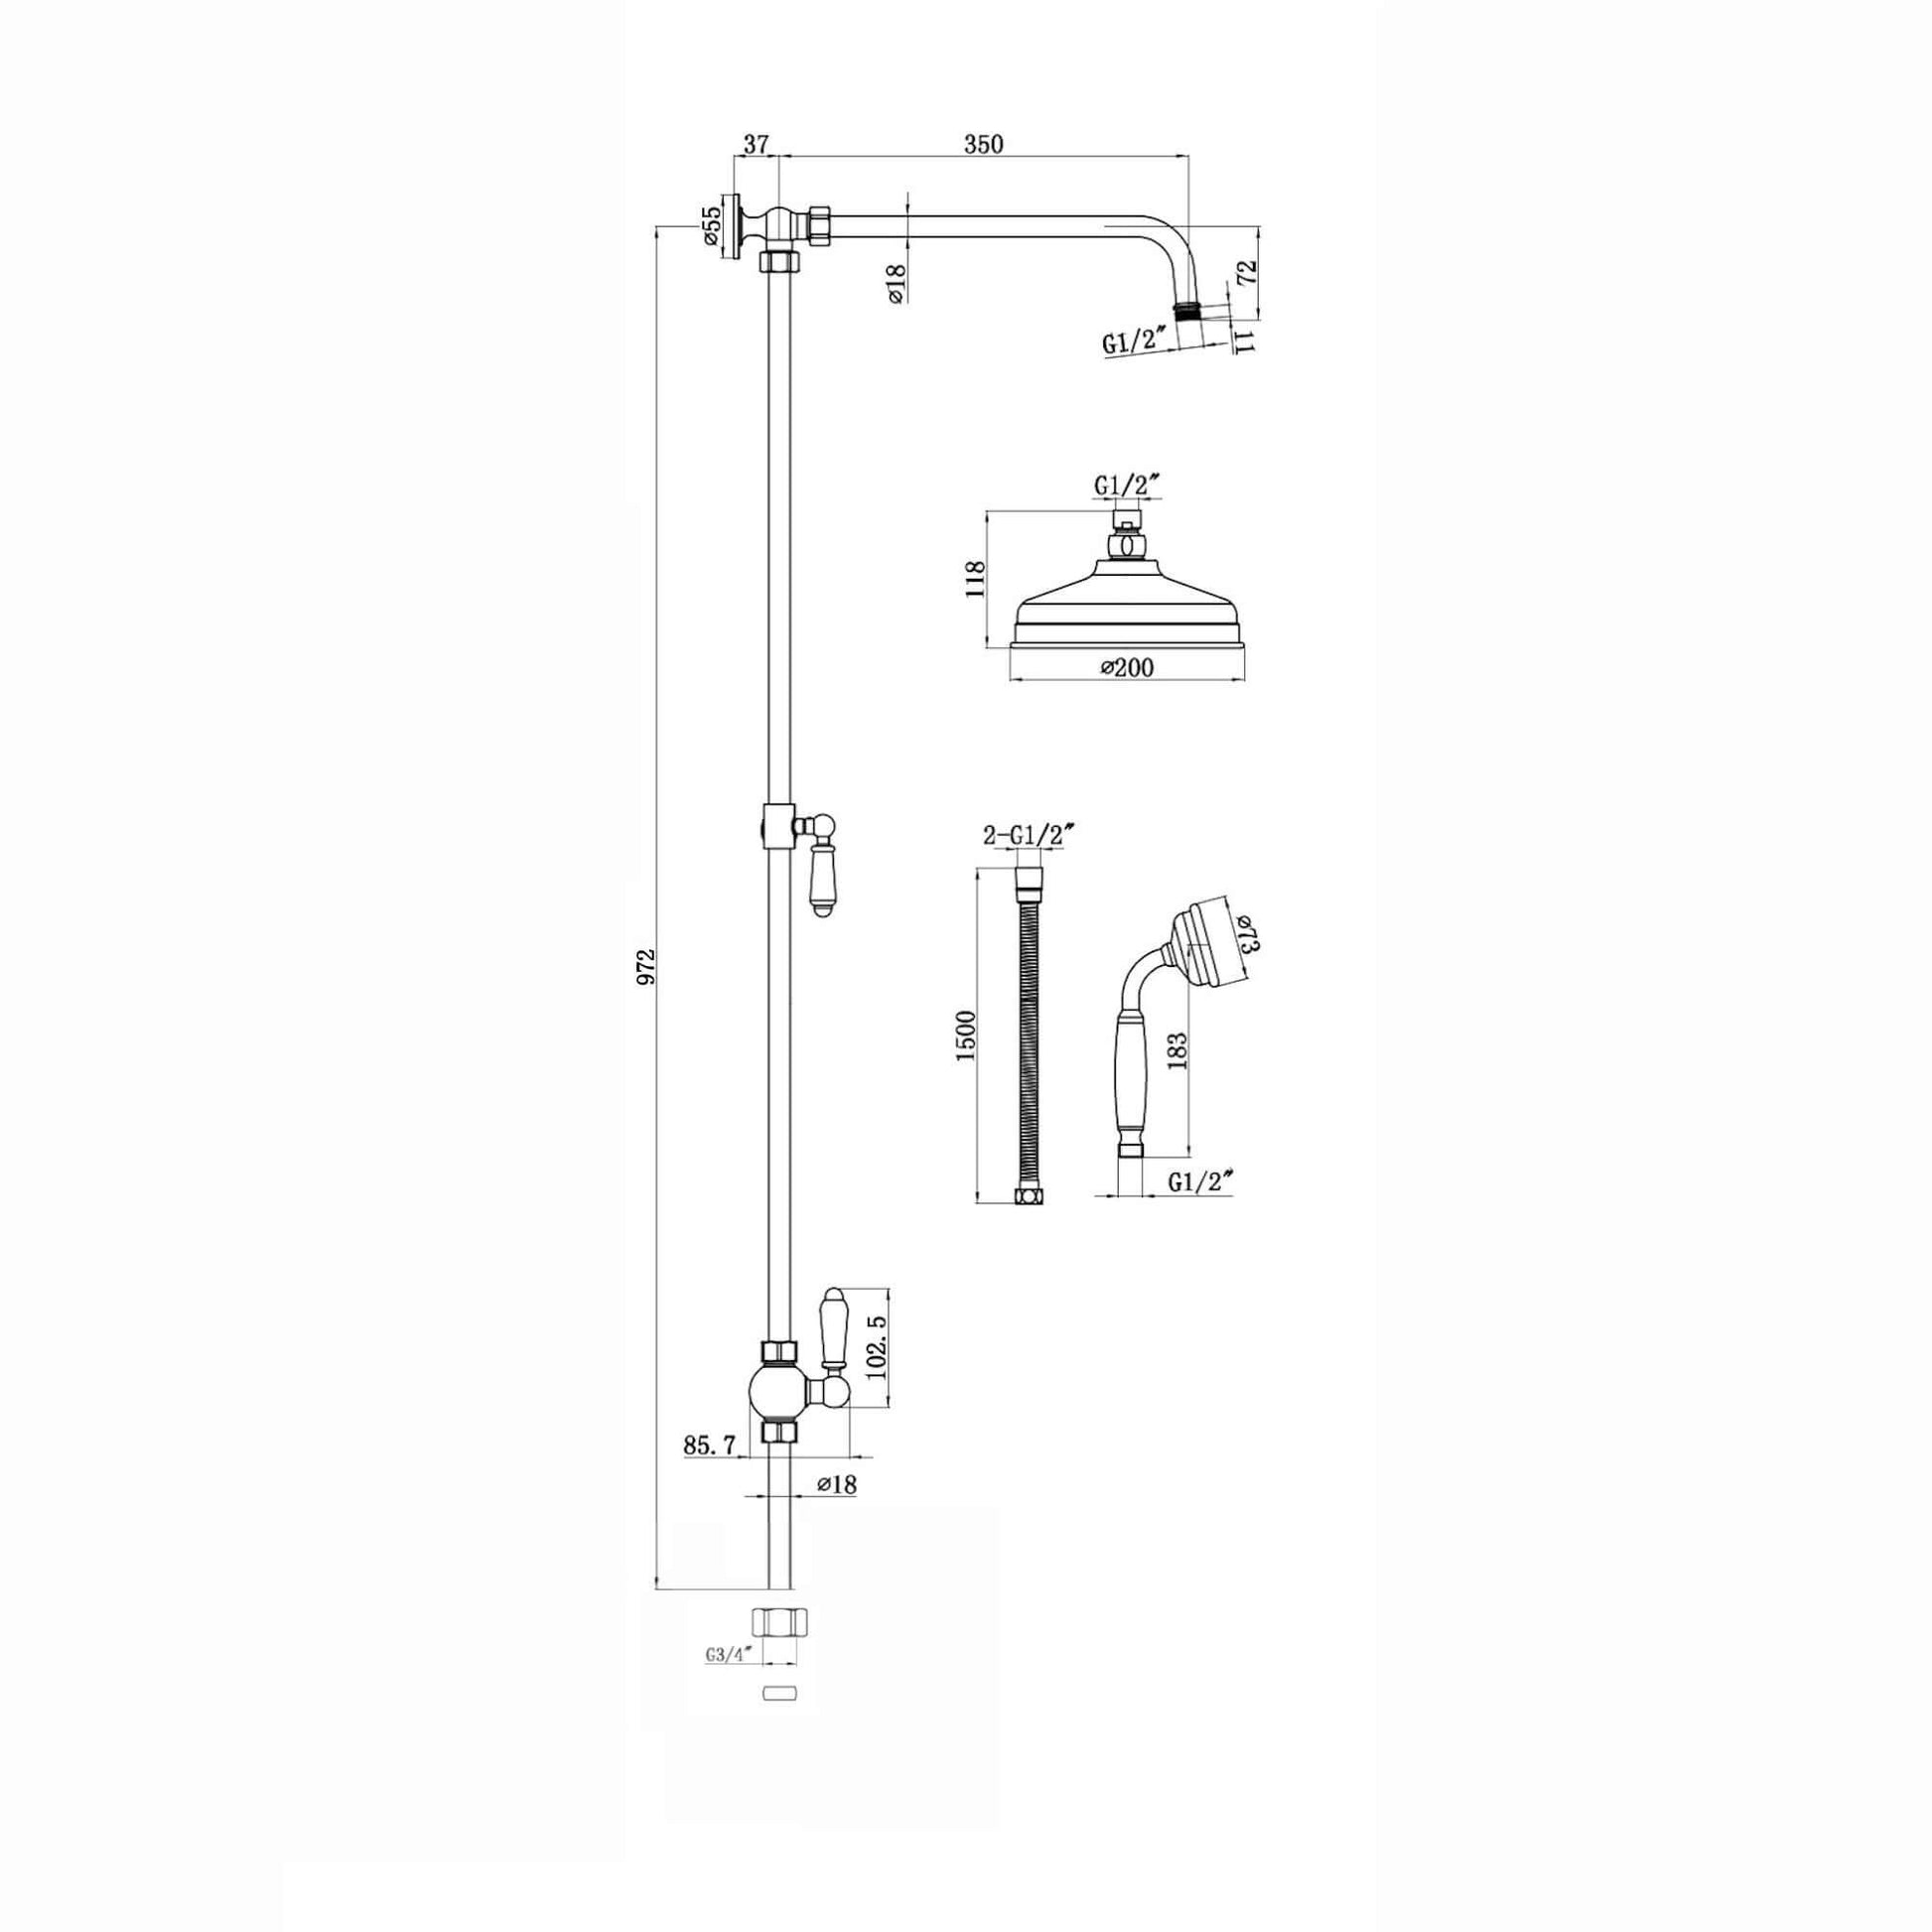 Downton traditional shower riser rail kit 2 outlet watercan head 200mm - antique bronze - Showers